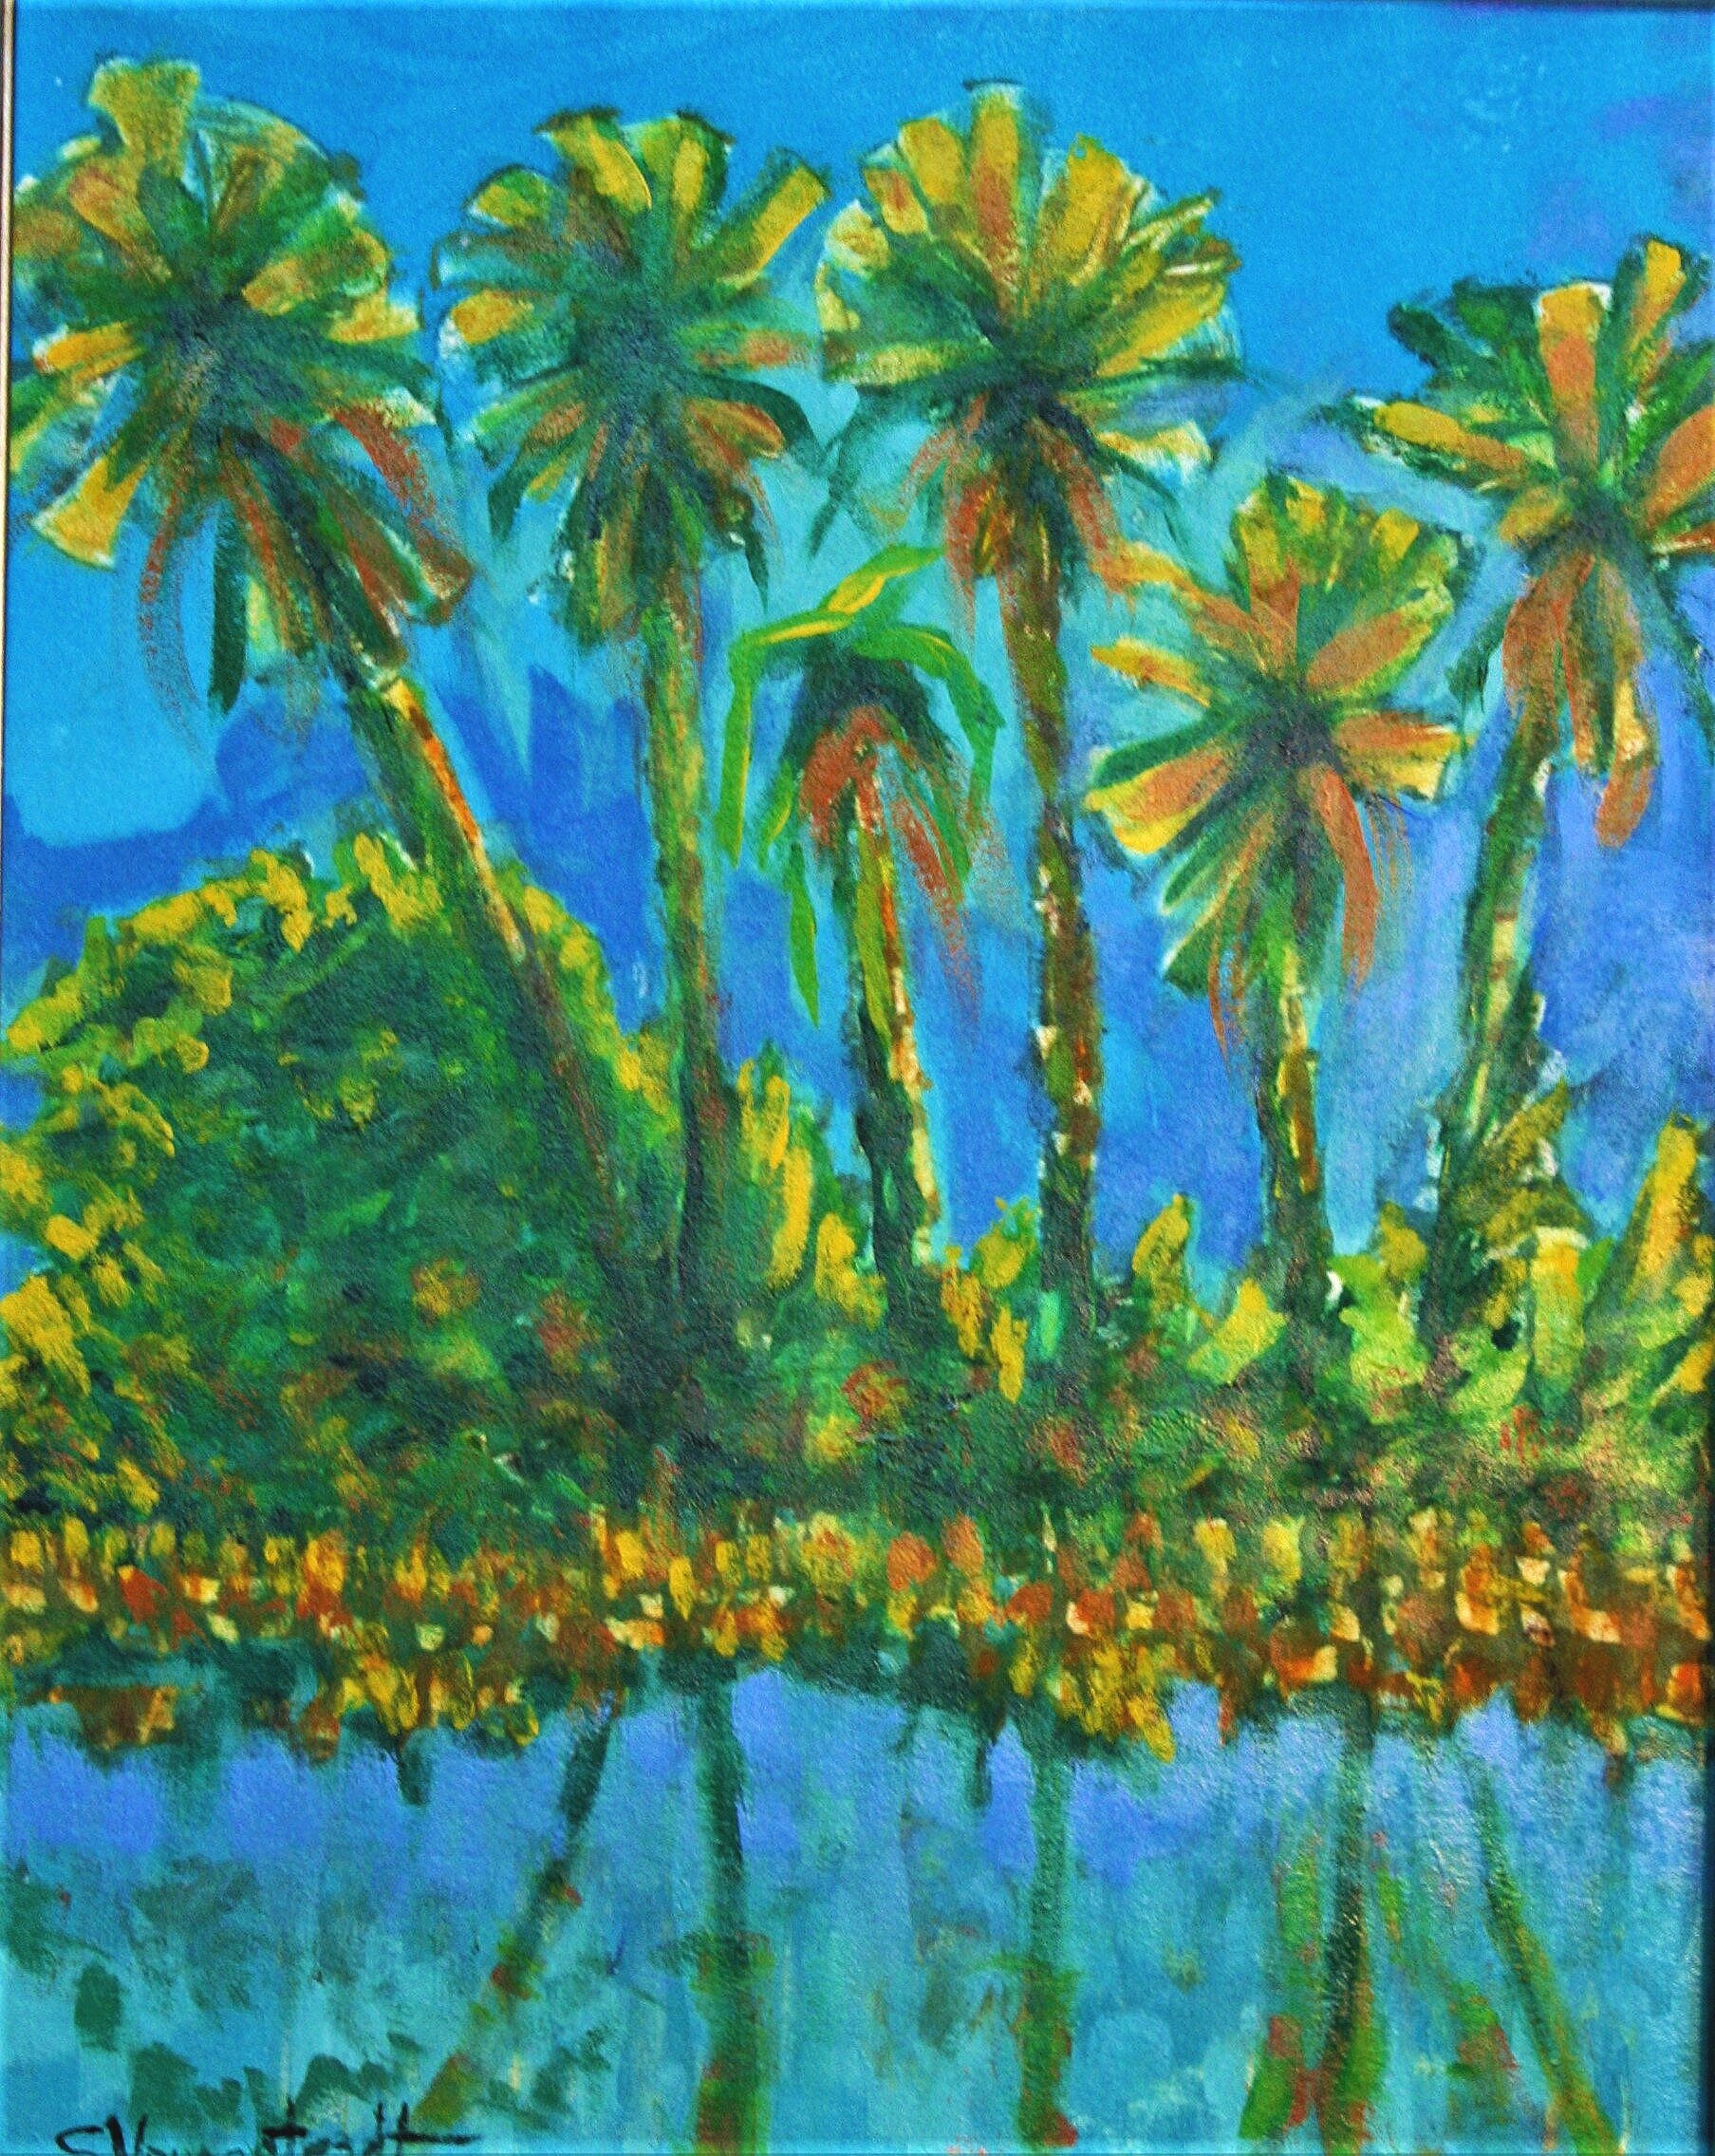 "Crystal River Palms II"  by Susana Youngsteadt